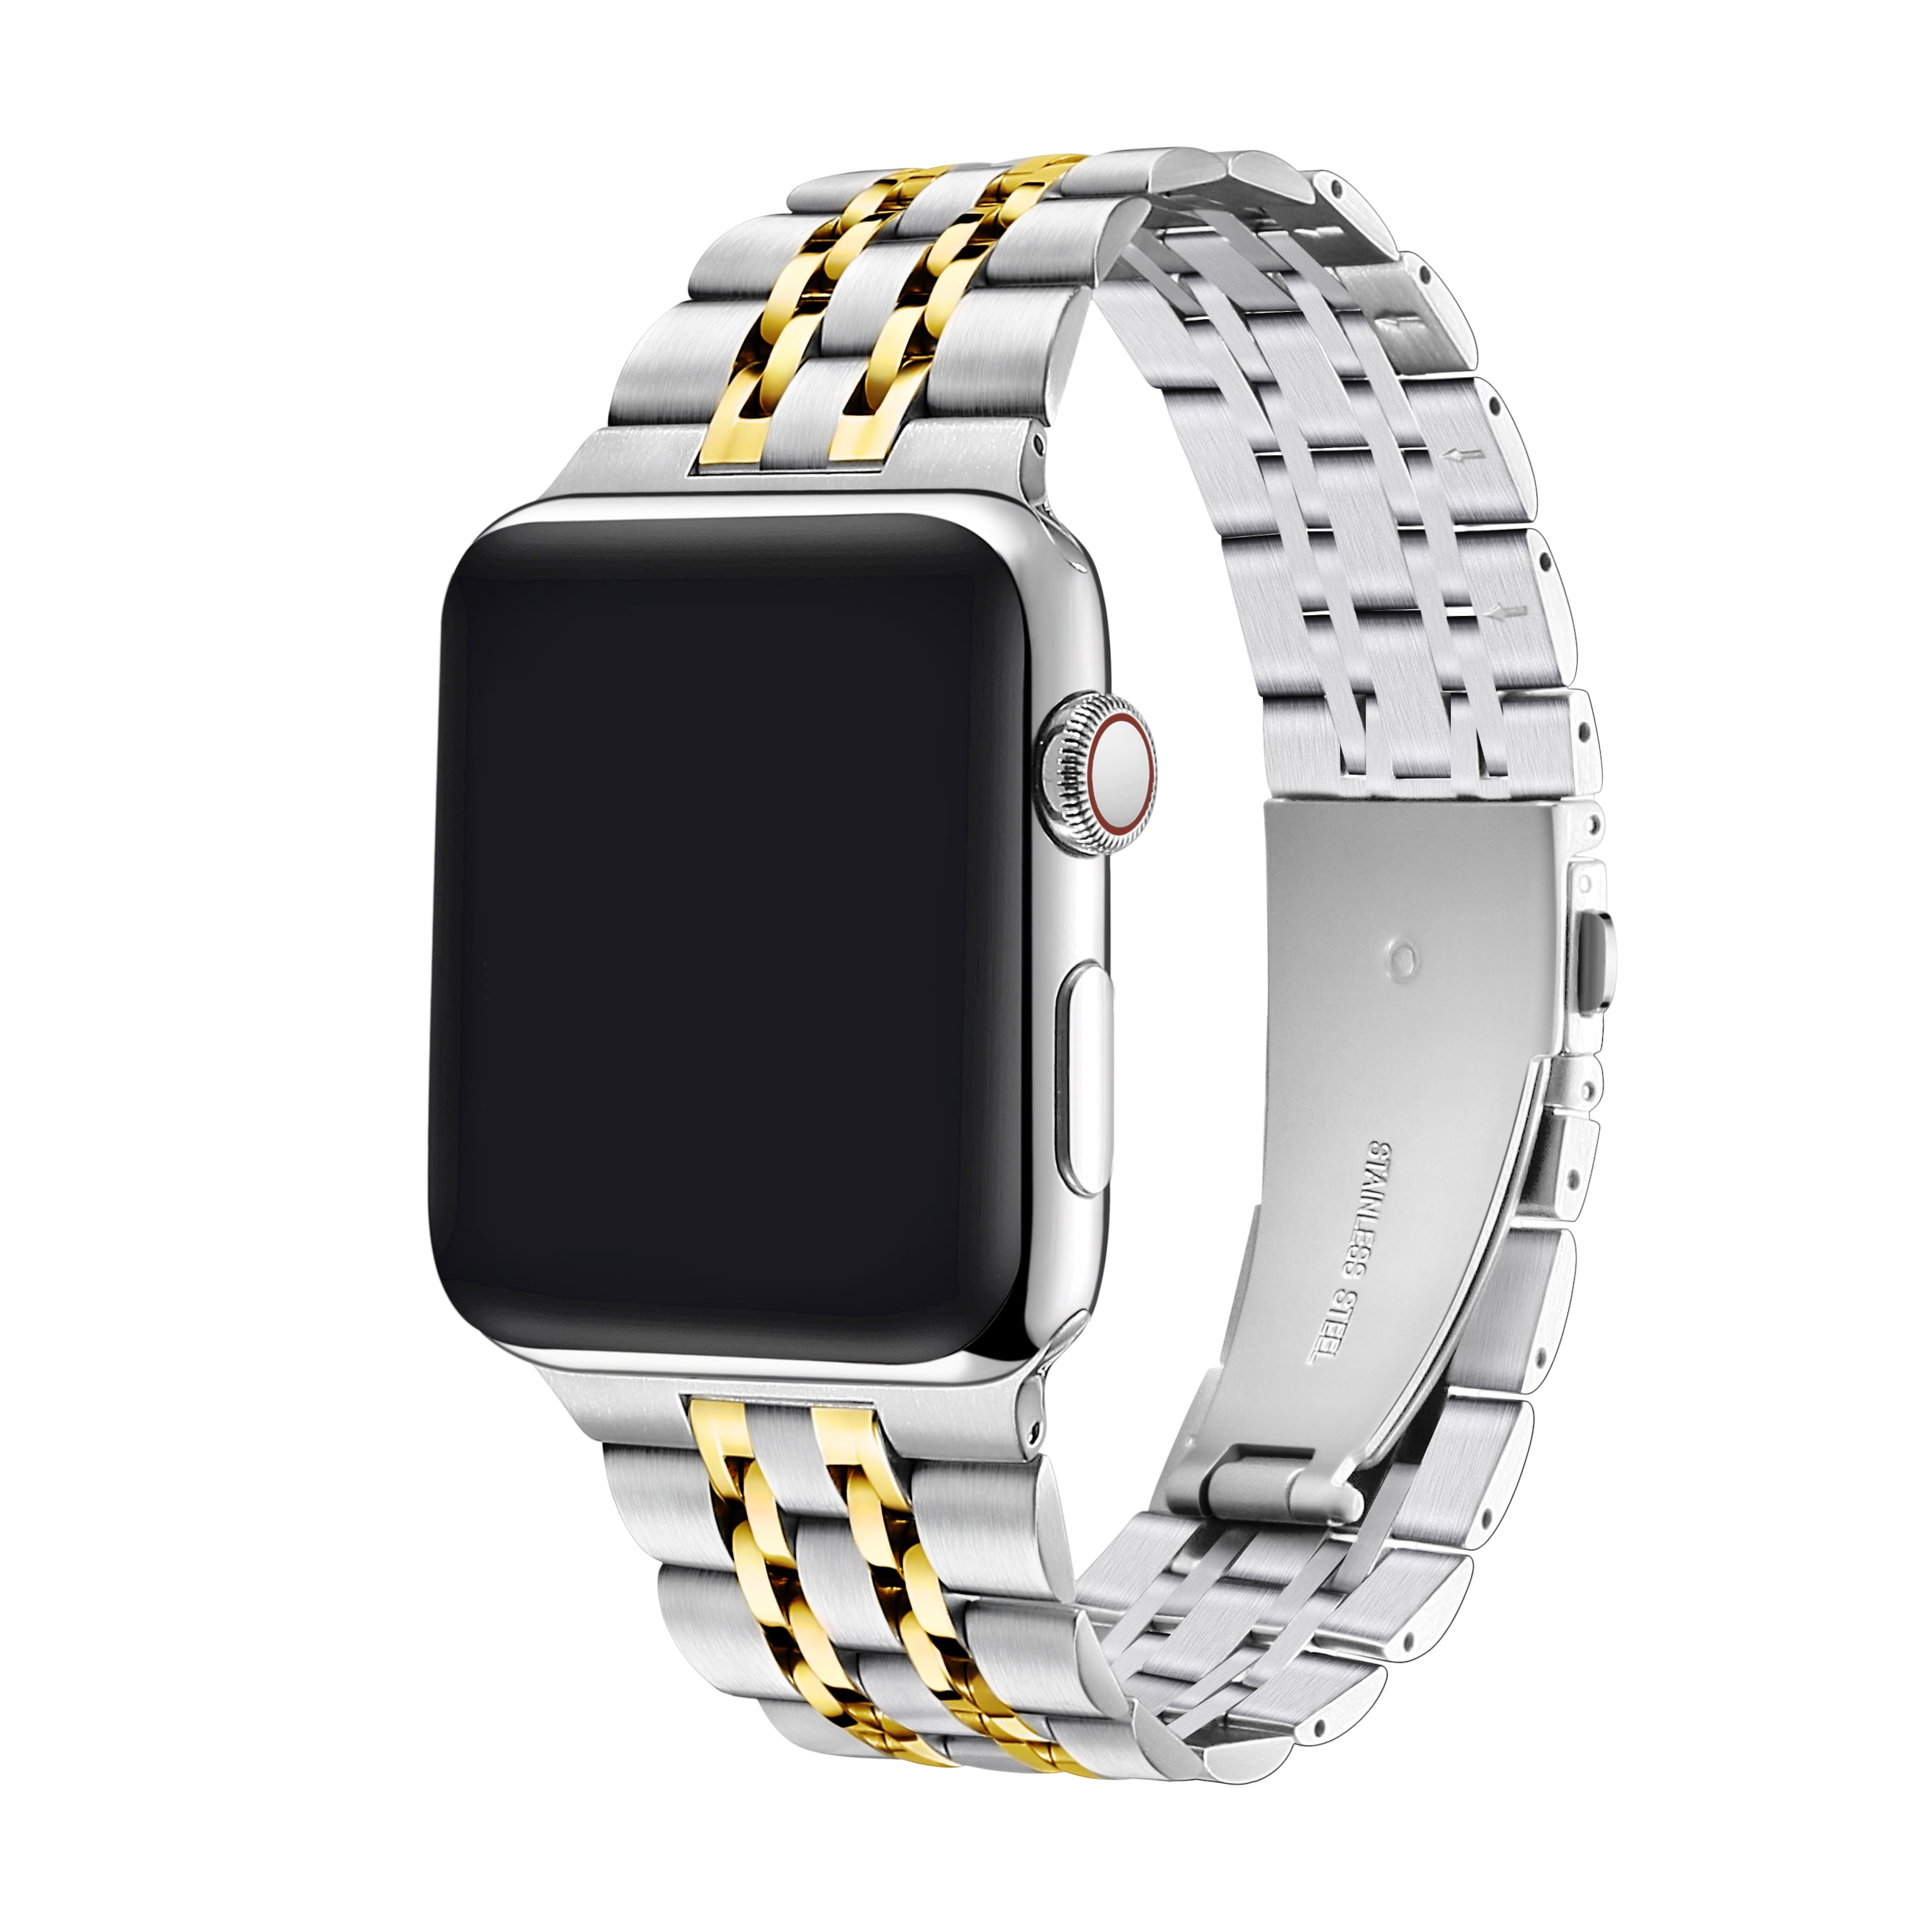 PoshTech Unisex Rainey Silver/Gold Stainless Steel Band for Apple Watch  Series 1-8&SE Size 38mm-41mm 